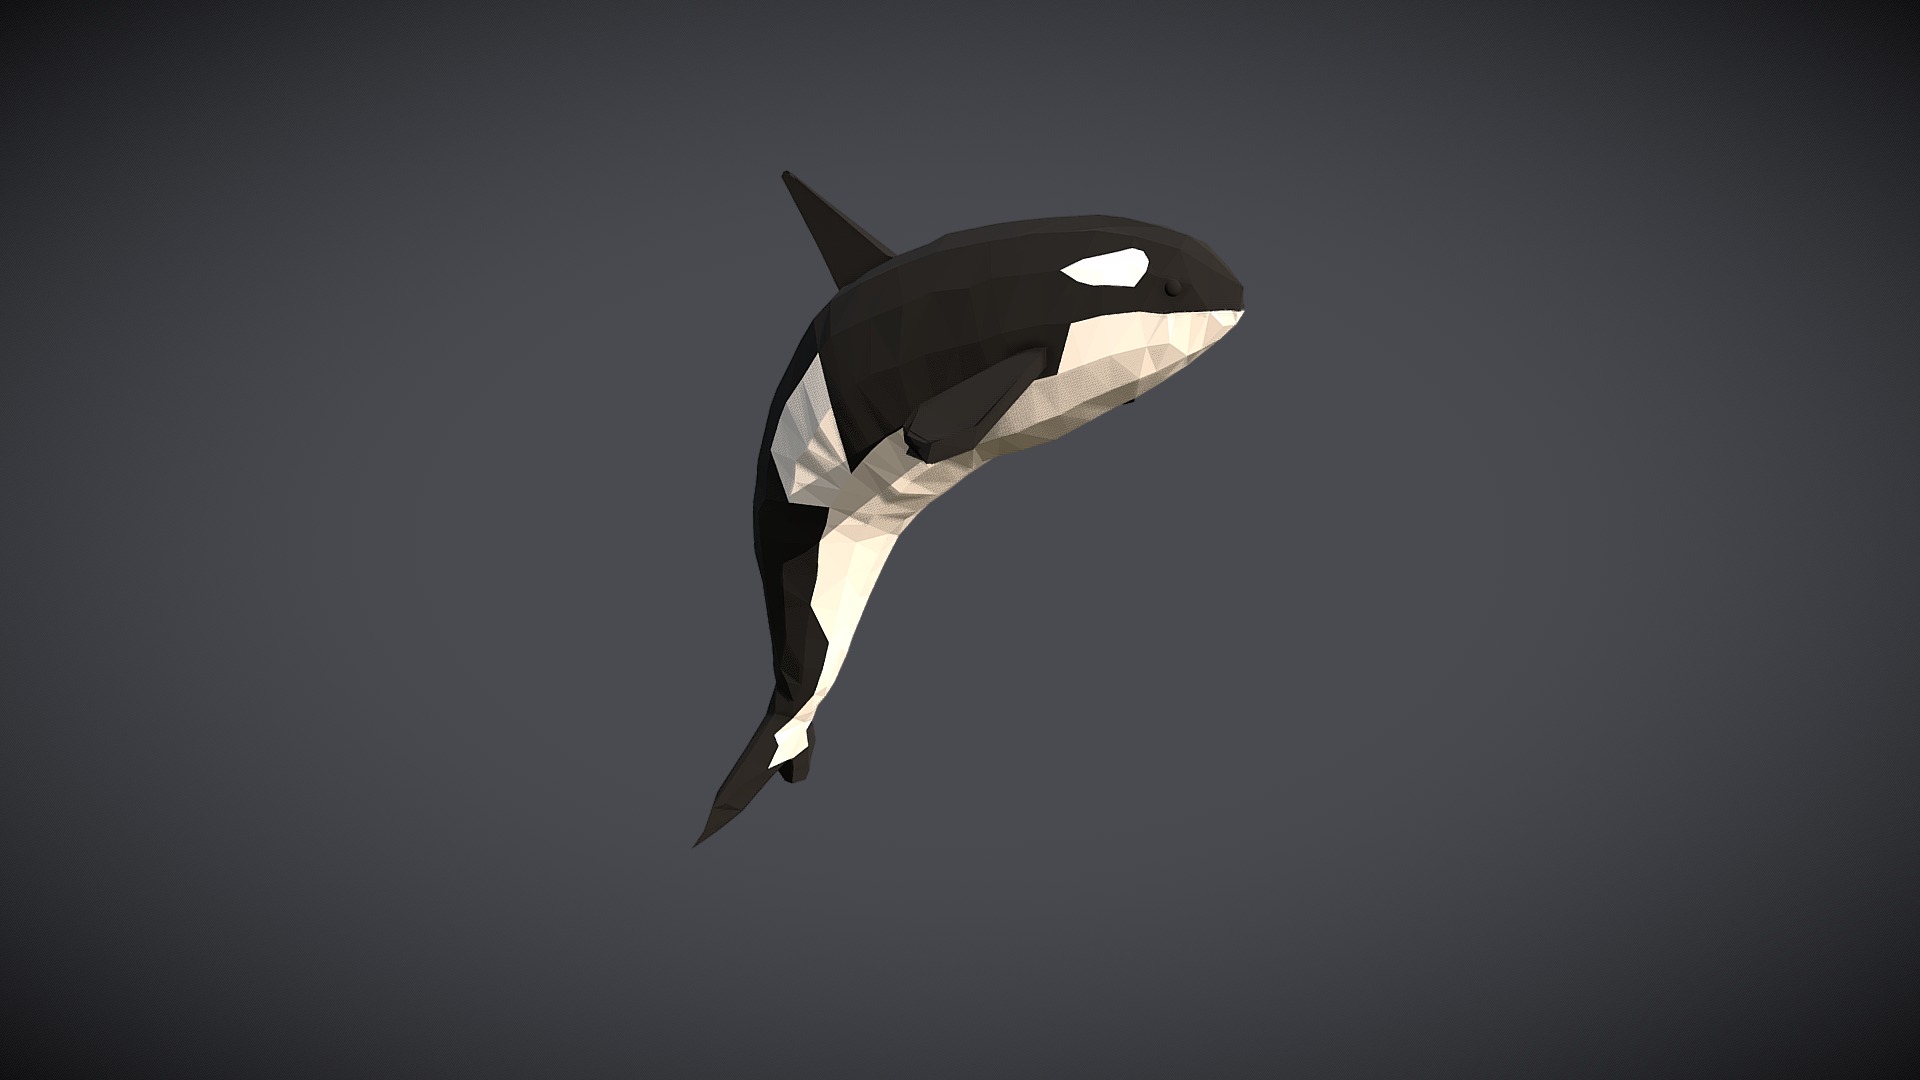 3D model Low-Poly Orka - This is a 3D model of the Low-Poly Orka. The 3D model is about a shark in the water.